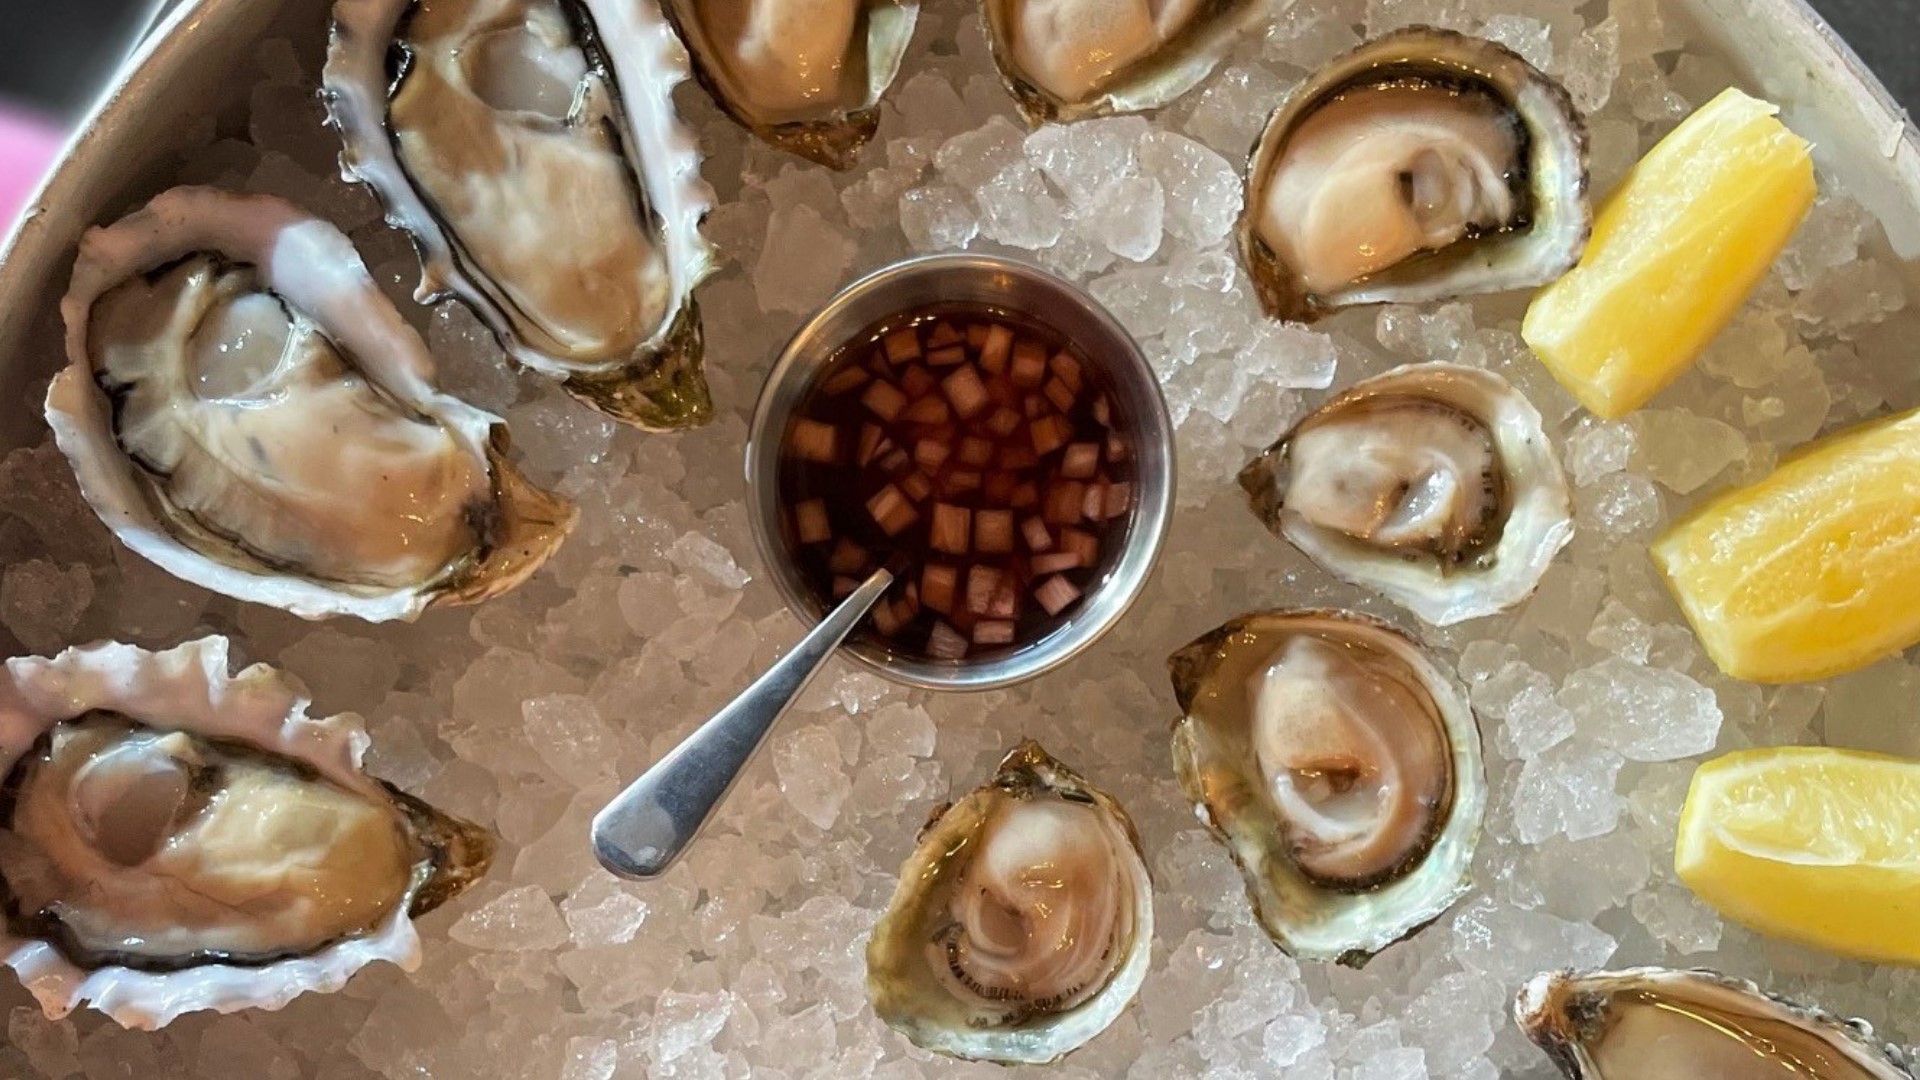 Chelsea Farms is a family-run oyster business on Eld Inlet - and they're bringing Olympia oysters straight to your plate. Sponsored by Experience Olympia & Beyond.